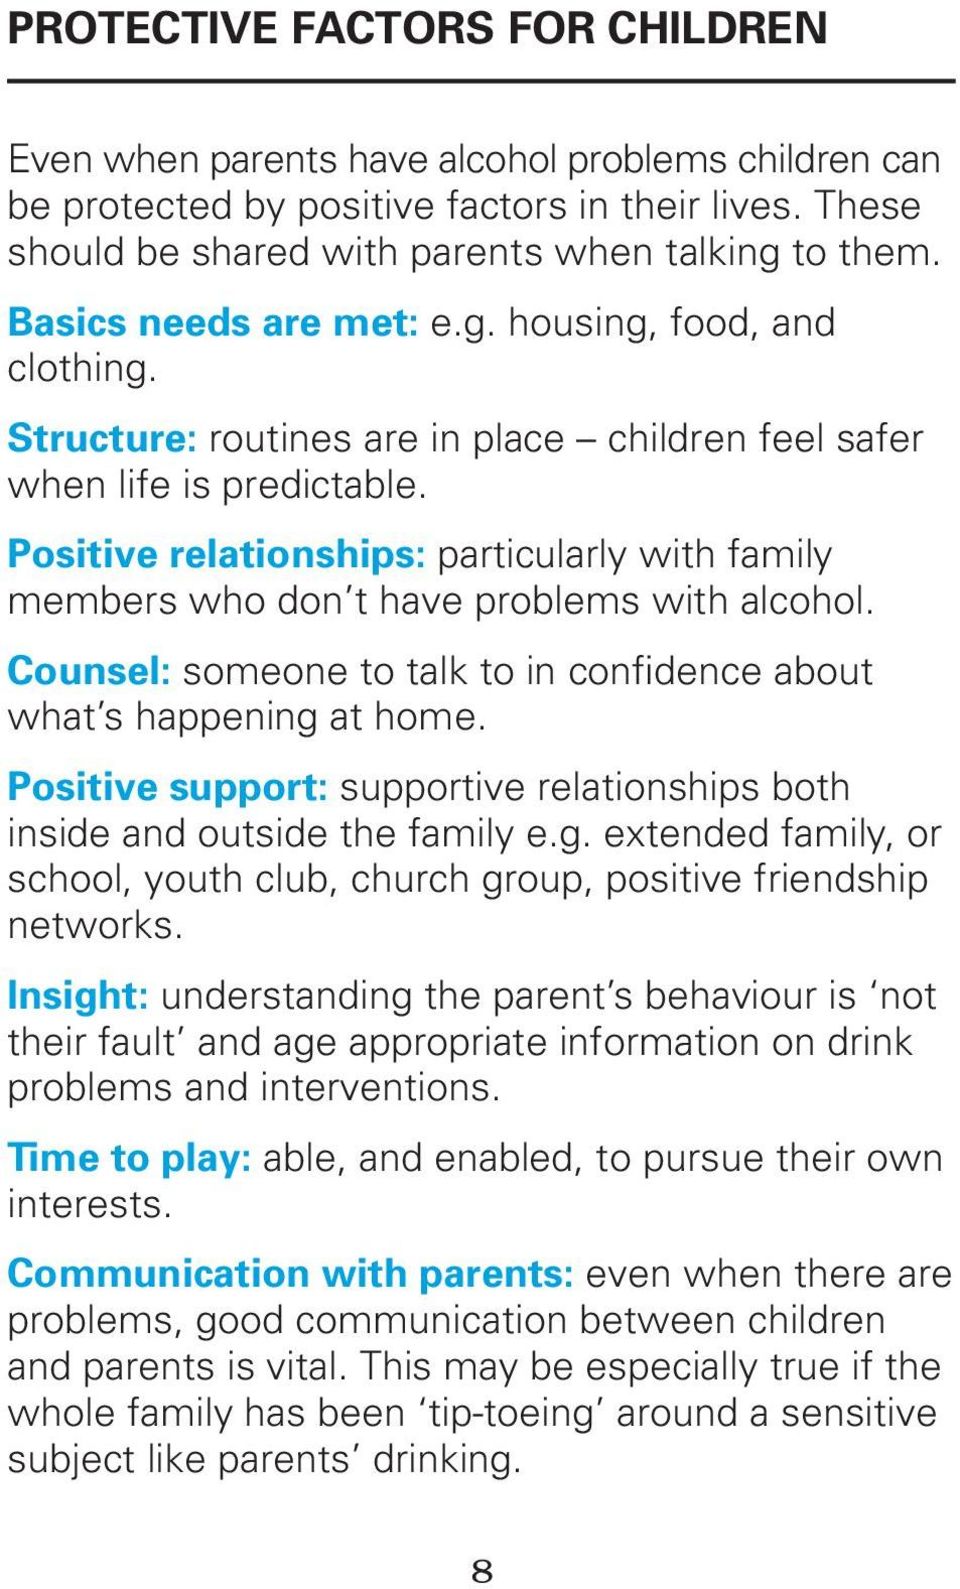 Positive relationships: particularly with family members who don t have problems with alcohol. Counsel: someone to talk to in confidence about what s happening at home.